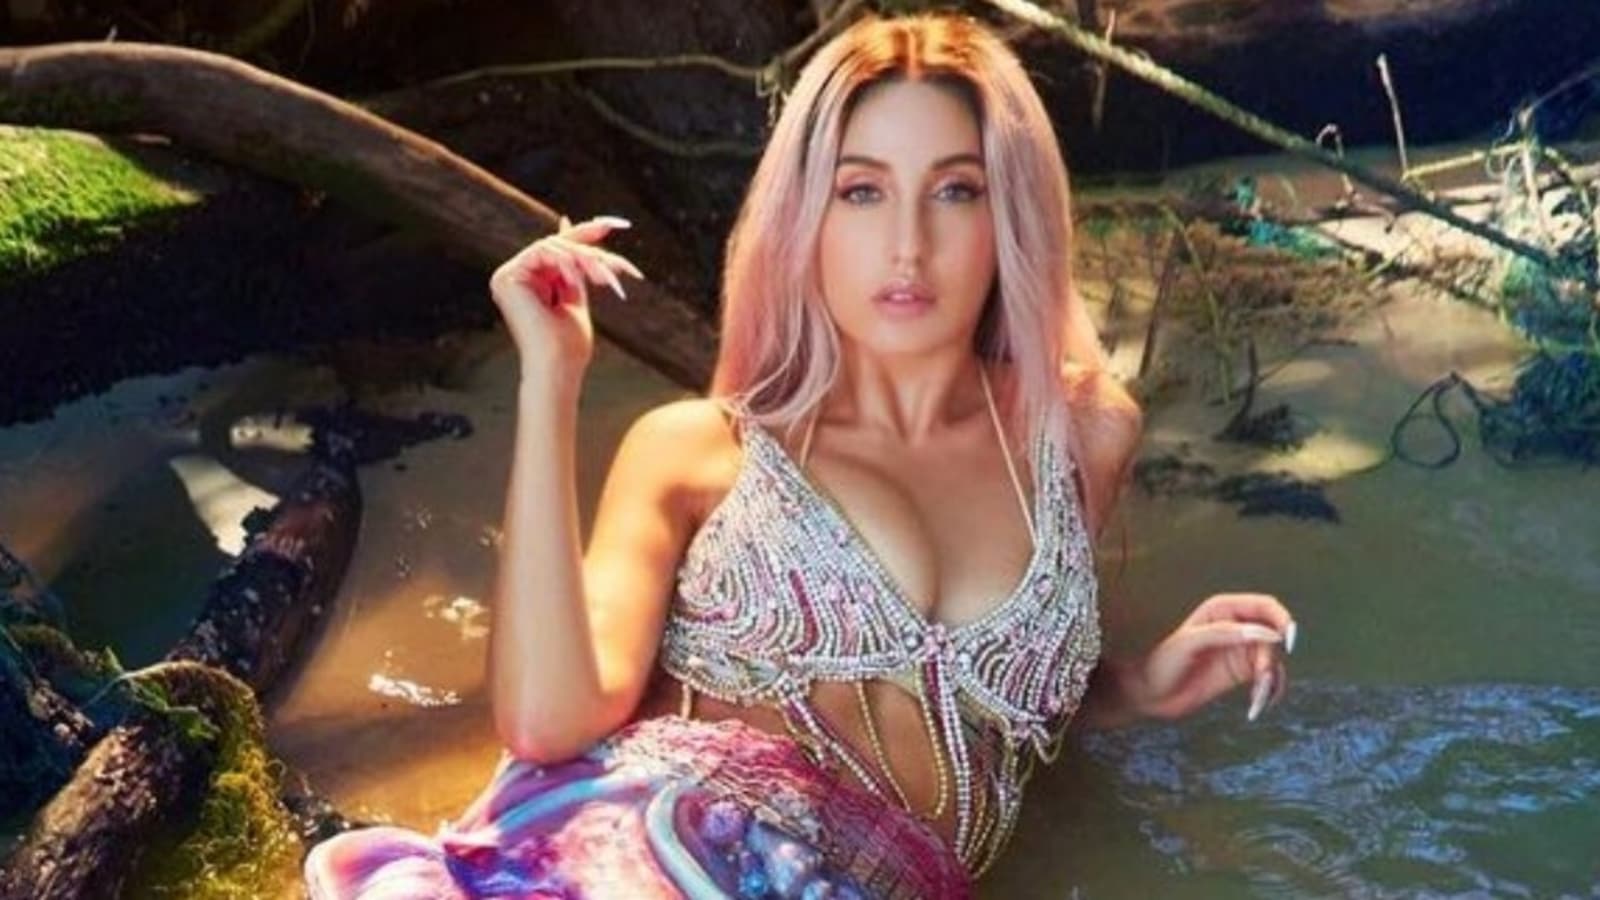 Sex Of Nora Fatehi - Nora Fatehi is a mermaid with blonde pink hair for sexy photoshoot, don't  miss Nargis Fakhri's comment | Fashion Trends - Hindustan Times